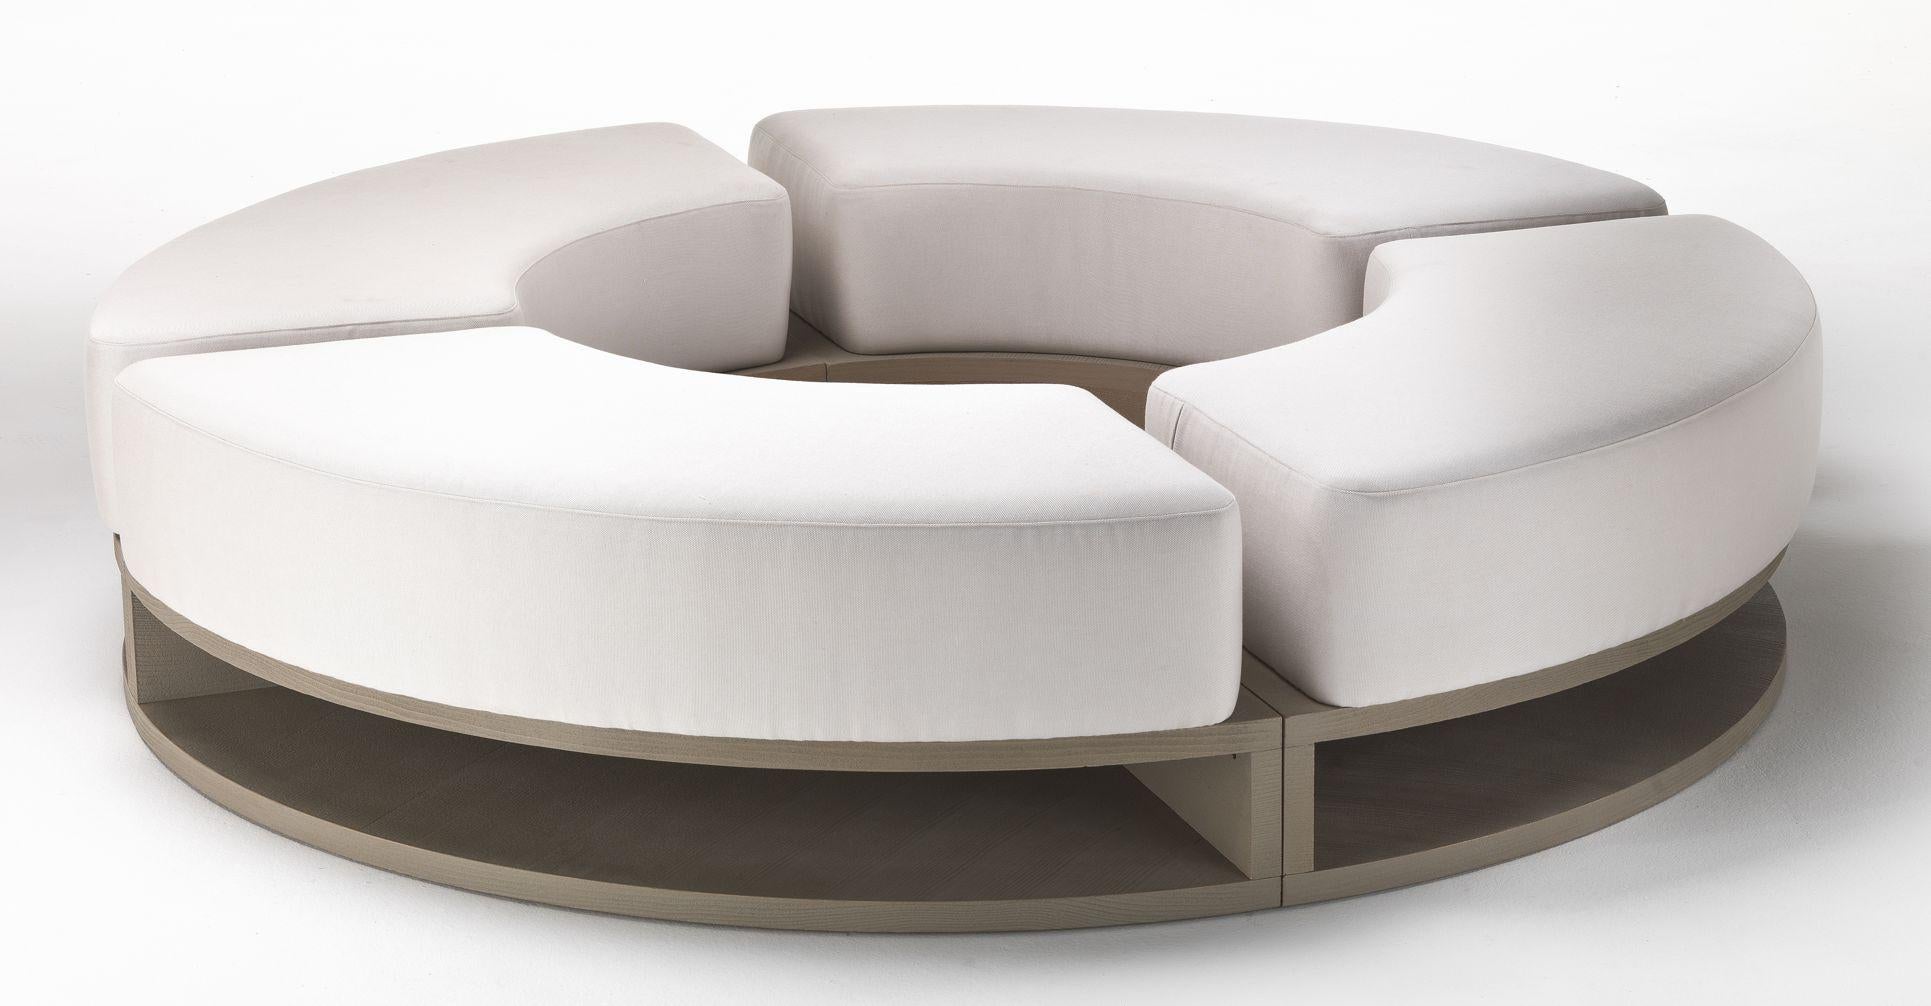 Crafted from solid sassafras wood, the Snow Circle Sofa stands as a symbol of versatility. Ideal for both indoor and outdoor spaces, it invites you to redefine your living experience. Picture yourself lounging on its inviting curves, surrounded by